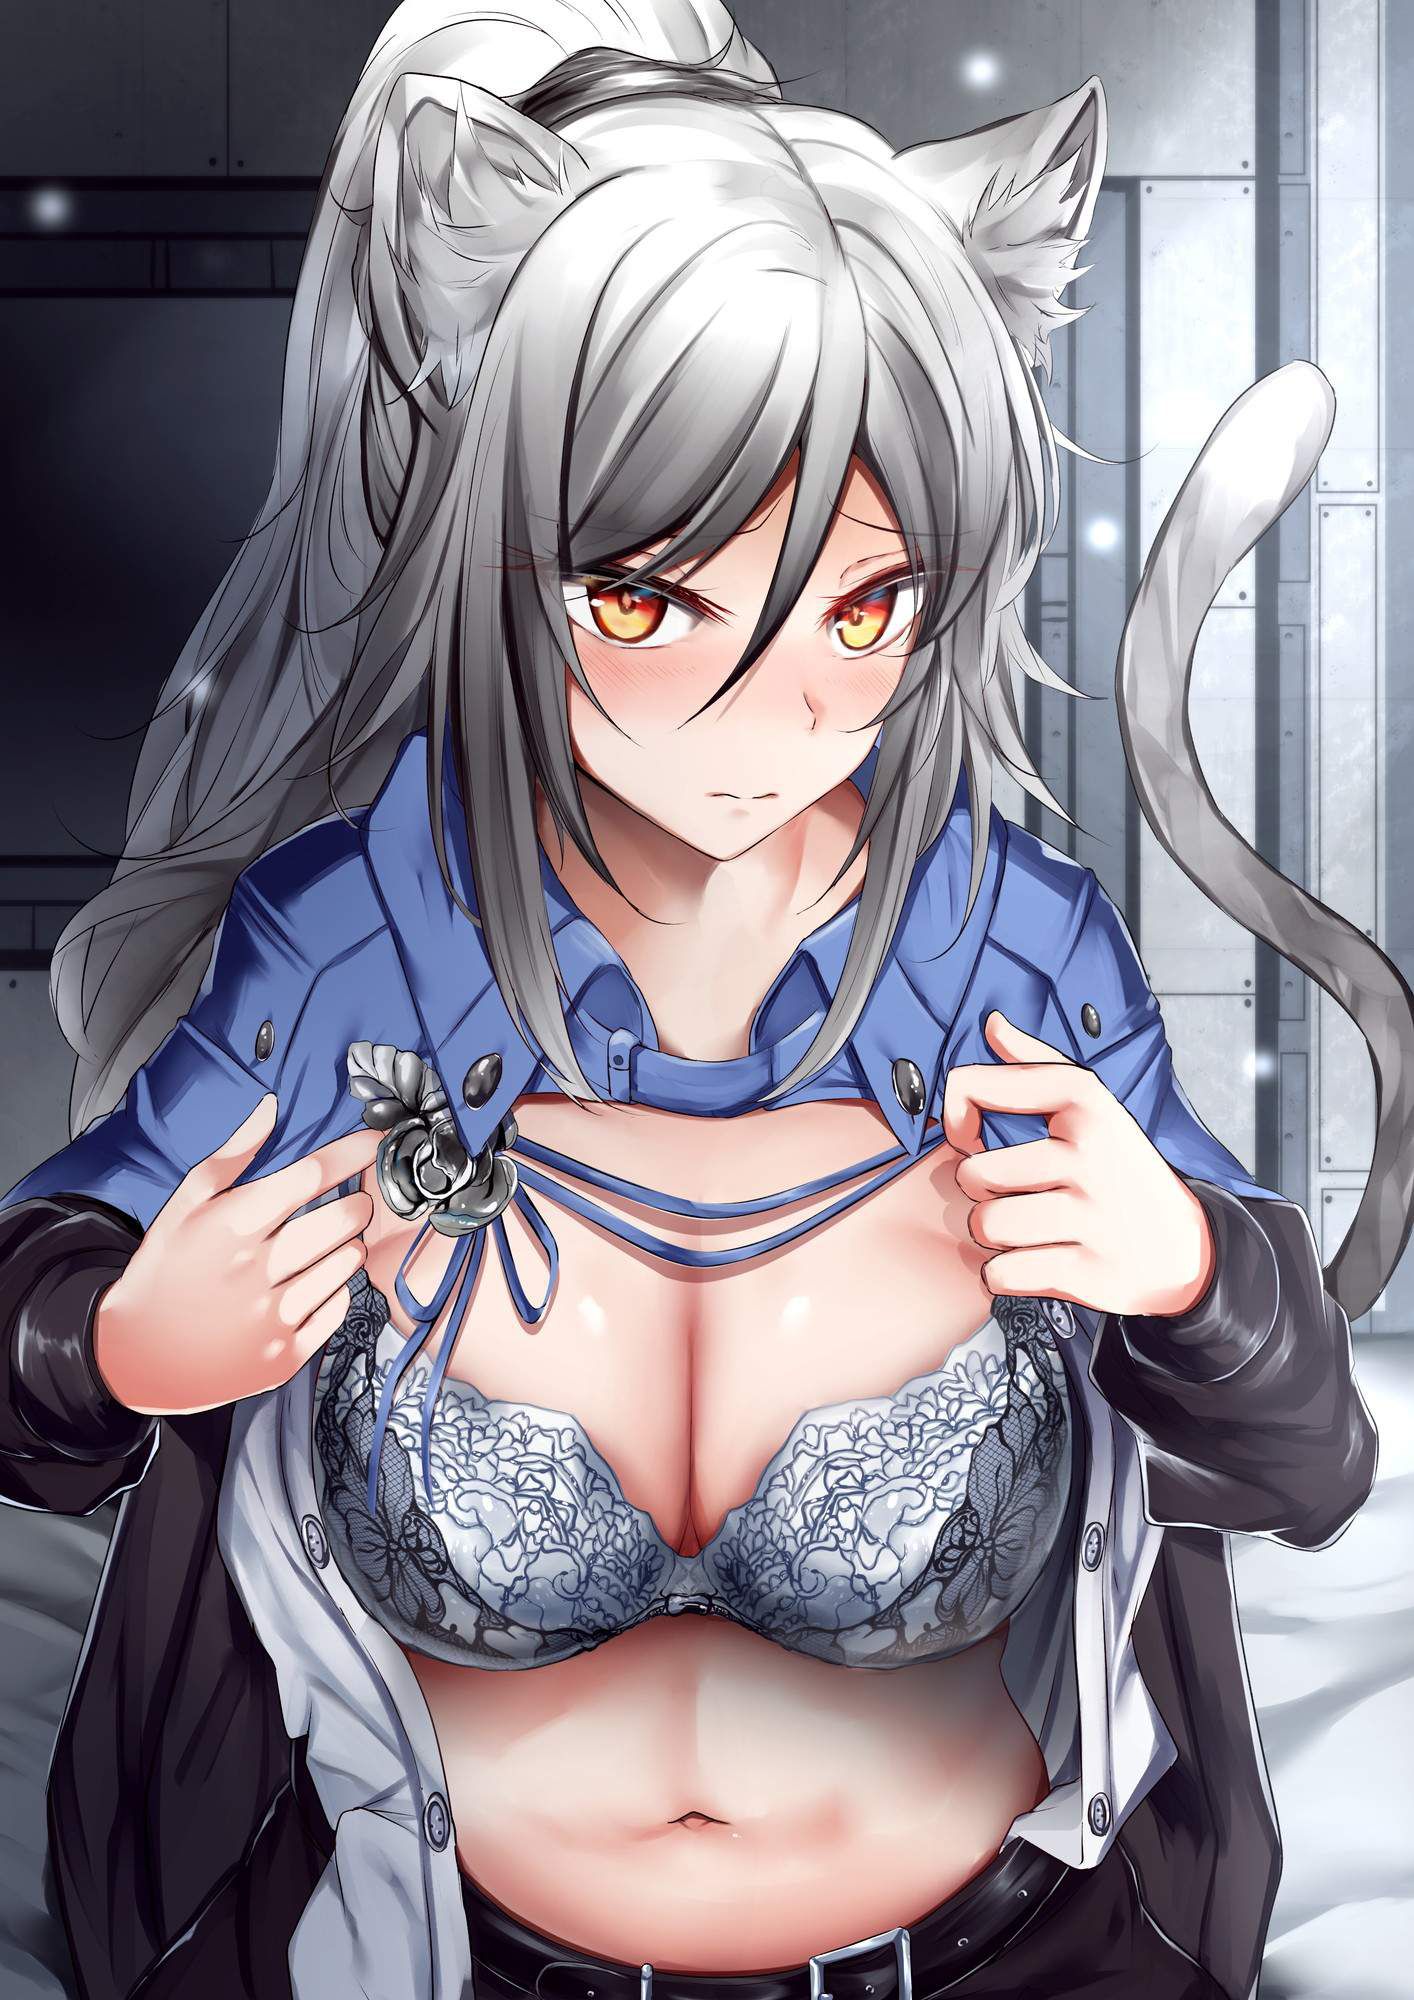 【Erotic Image】 I collected cute images of Schwarz, but it is too erotic ... (Ark Knights) 5